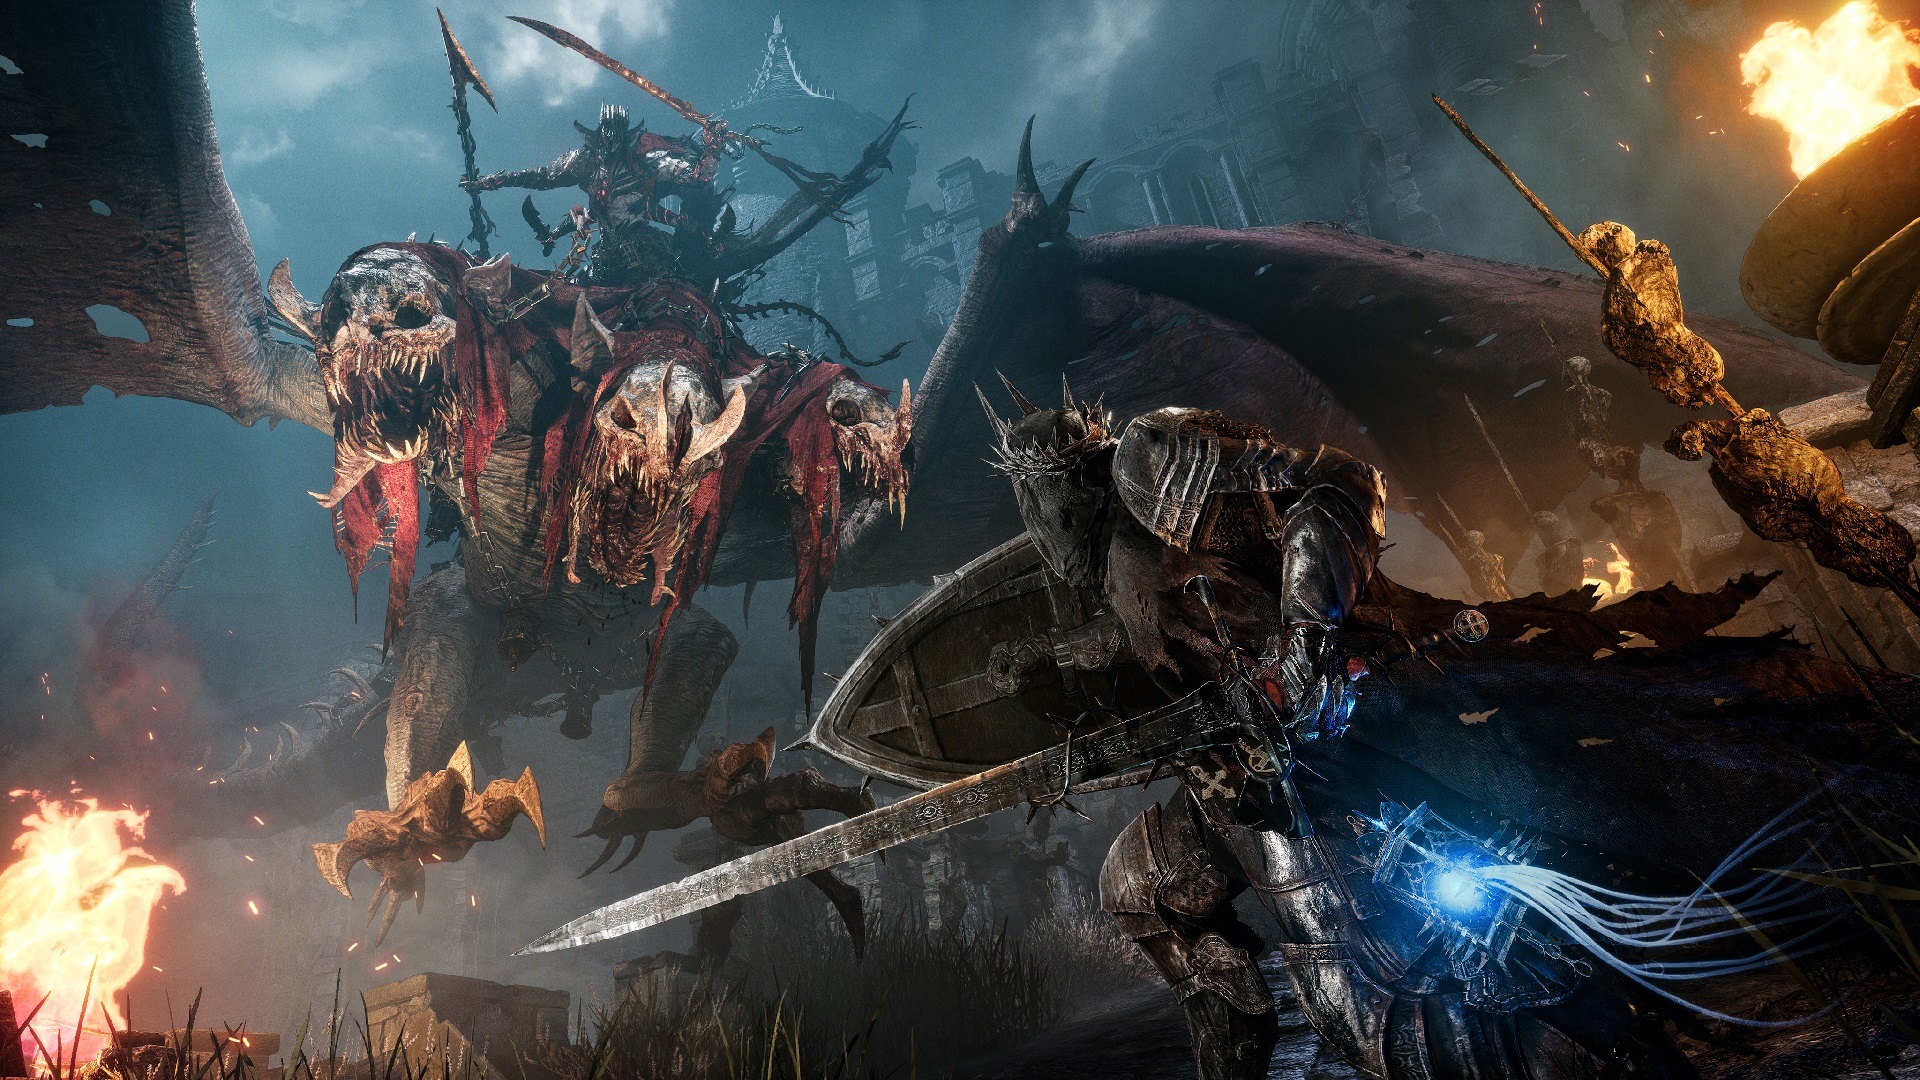 Lords of the Fallen is as refreshing as it is troubled